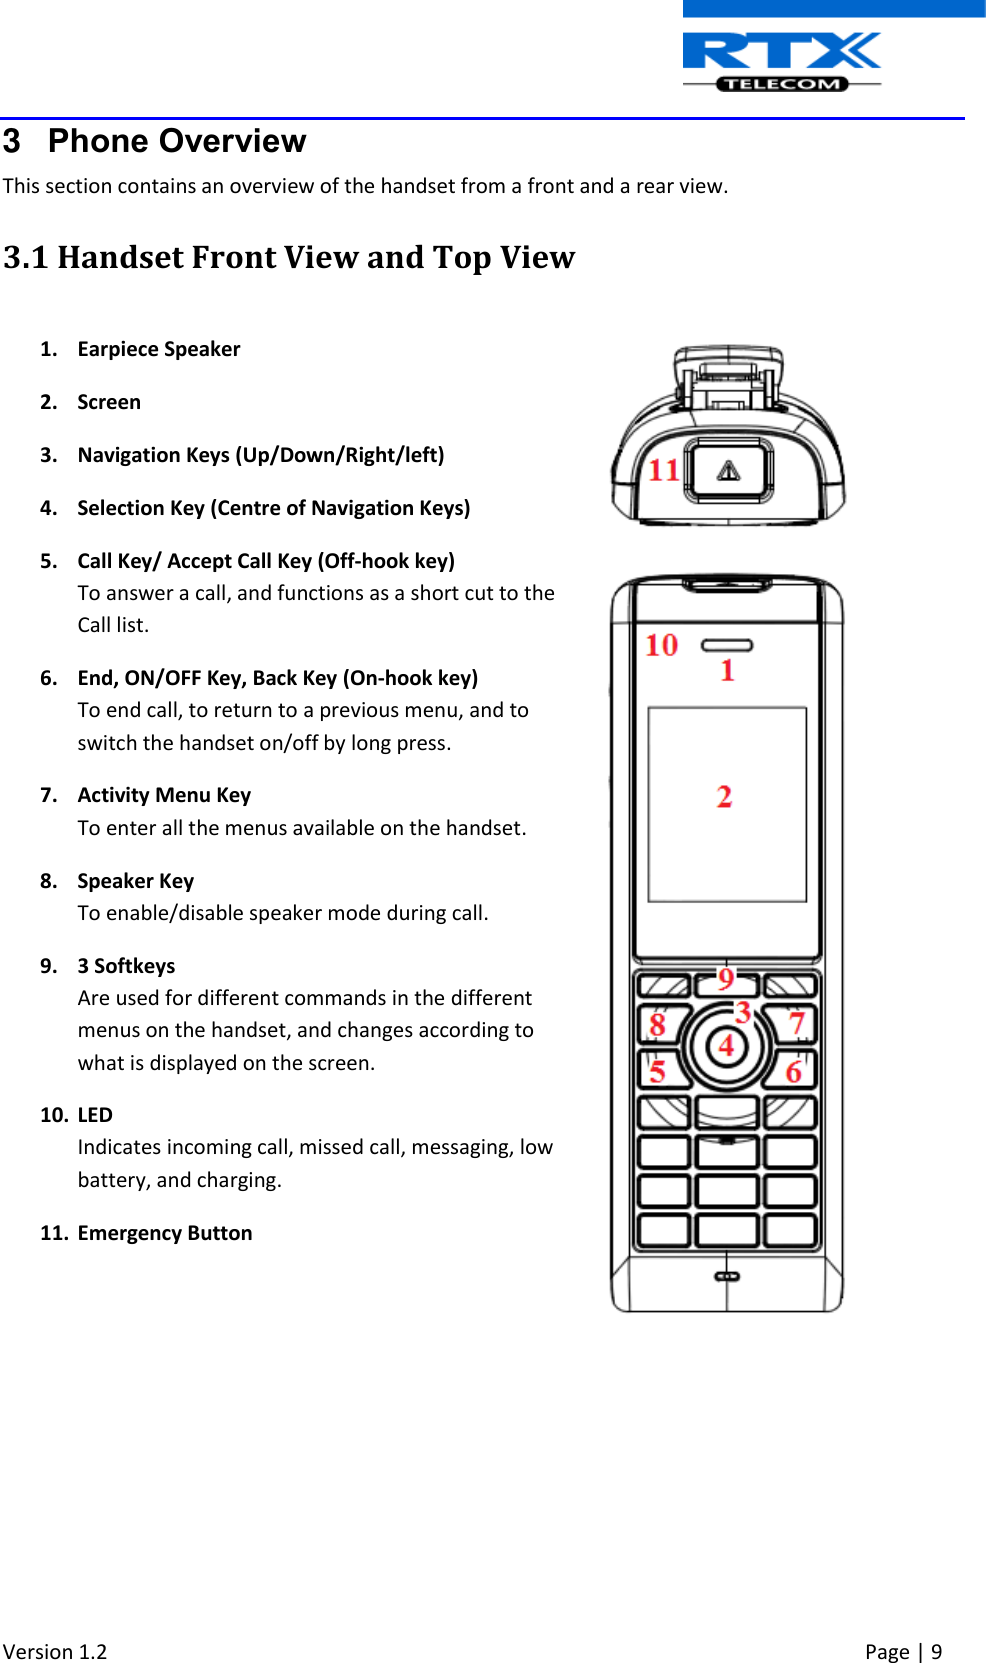  Version 1.2     Page | 9   3  Phone Overview This section contains an overview of the handset from a front and a rear view.  3.1 Handset Front View and Top View  1. Earpiece Speaker 2. Screen 3. Navigation Keys (Up/Down/Right/left) 4. Selection Key (Centre of Navigation Keys) 5. Call Key/ Accept Call Key (Off-hook key) To answer a call, and functions as a short cut to the Call list. 6. End, ON/OFF Key, Back Key (On-hook key) To end call, to return to a previous menu, and to switch the handset on/off by long press. 7. Activity Menu Key To enter all the menus available on the handset. 8. Speaker Key To enable/disable speaker mode during call. 9. 3 Softkeys Are used for different commands in the different menus on the handset, and changes according to what is displayed on the screen. 10. LED  Indicates incoming call, missed call, messaging, low battery, and charging. 11. Emergency Button       